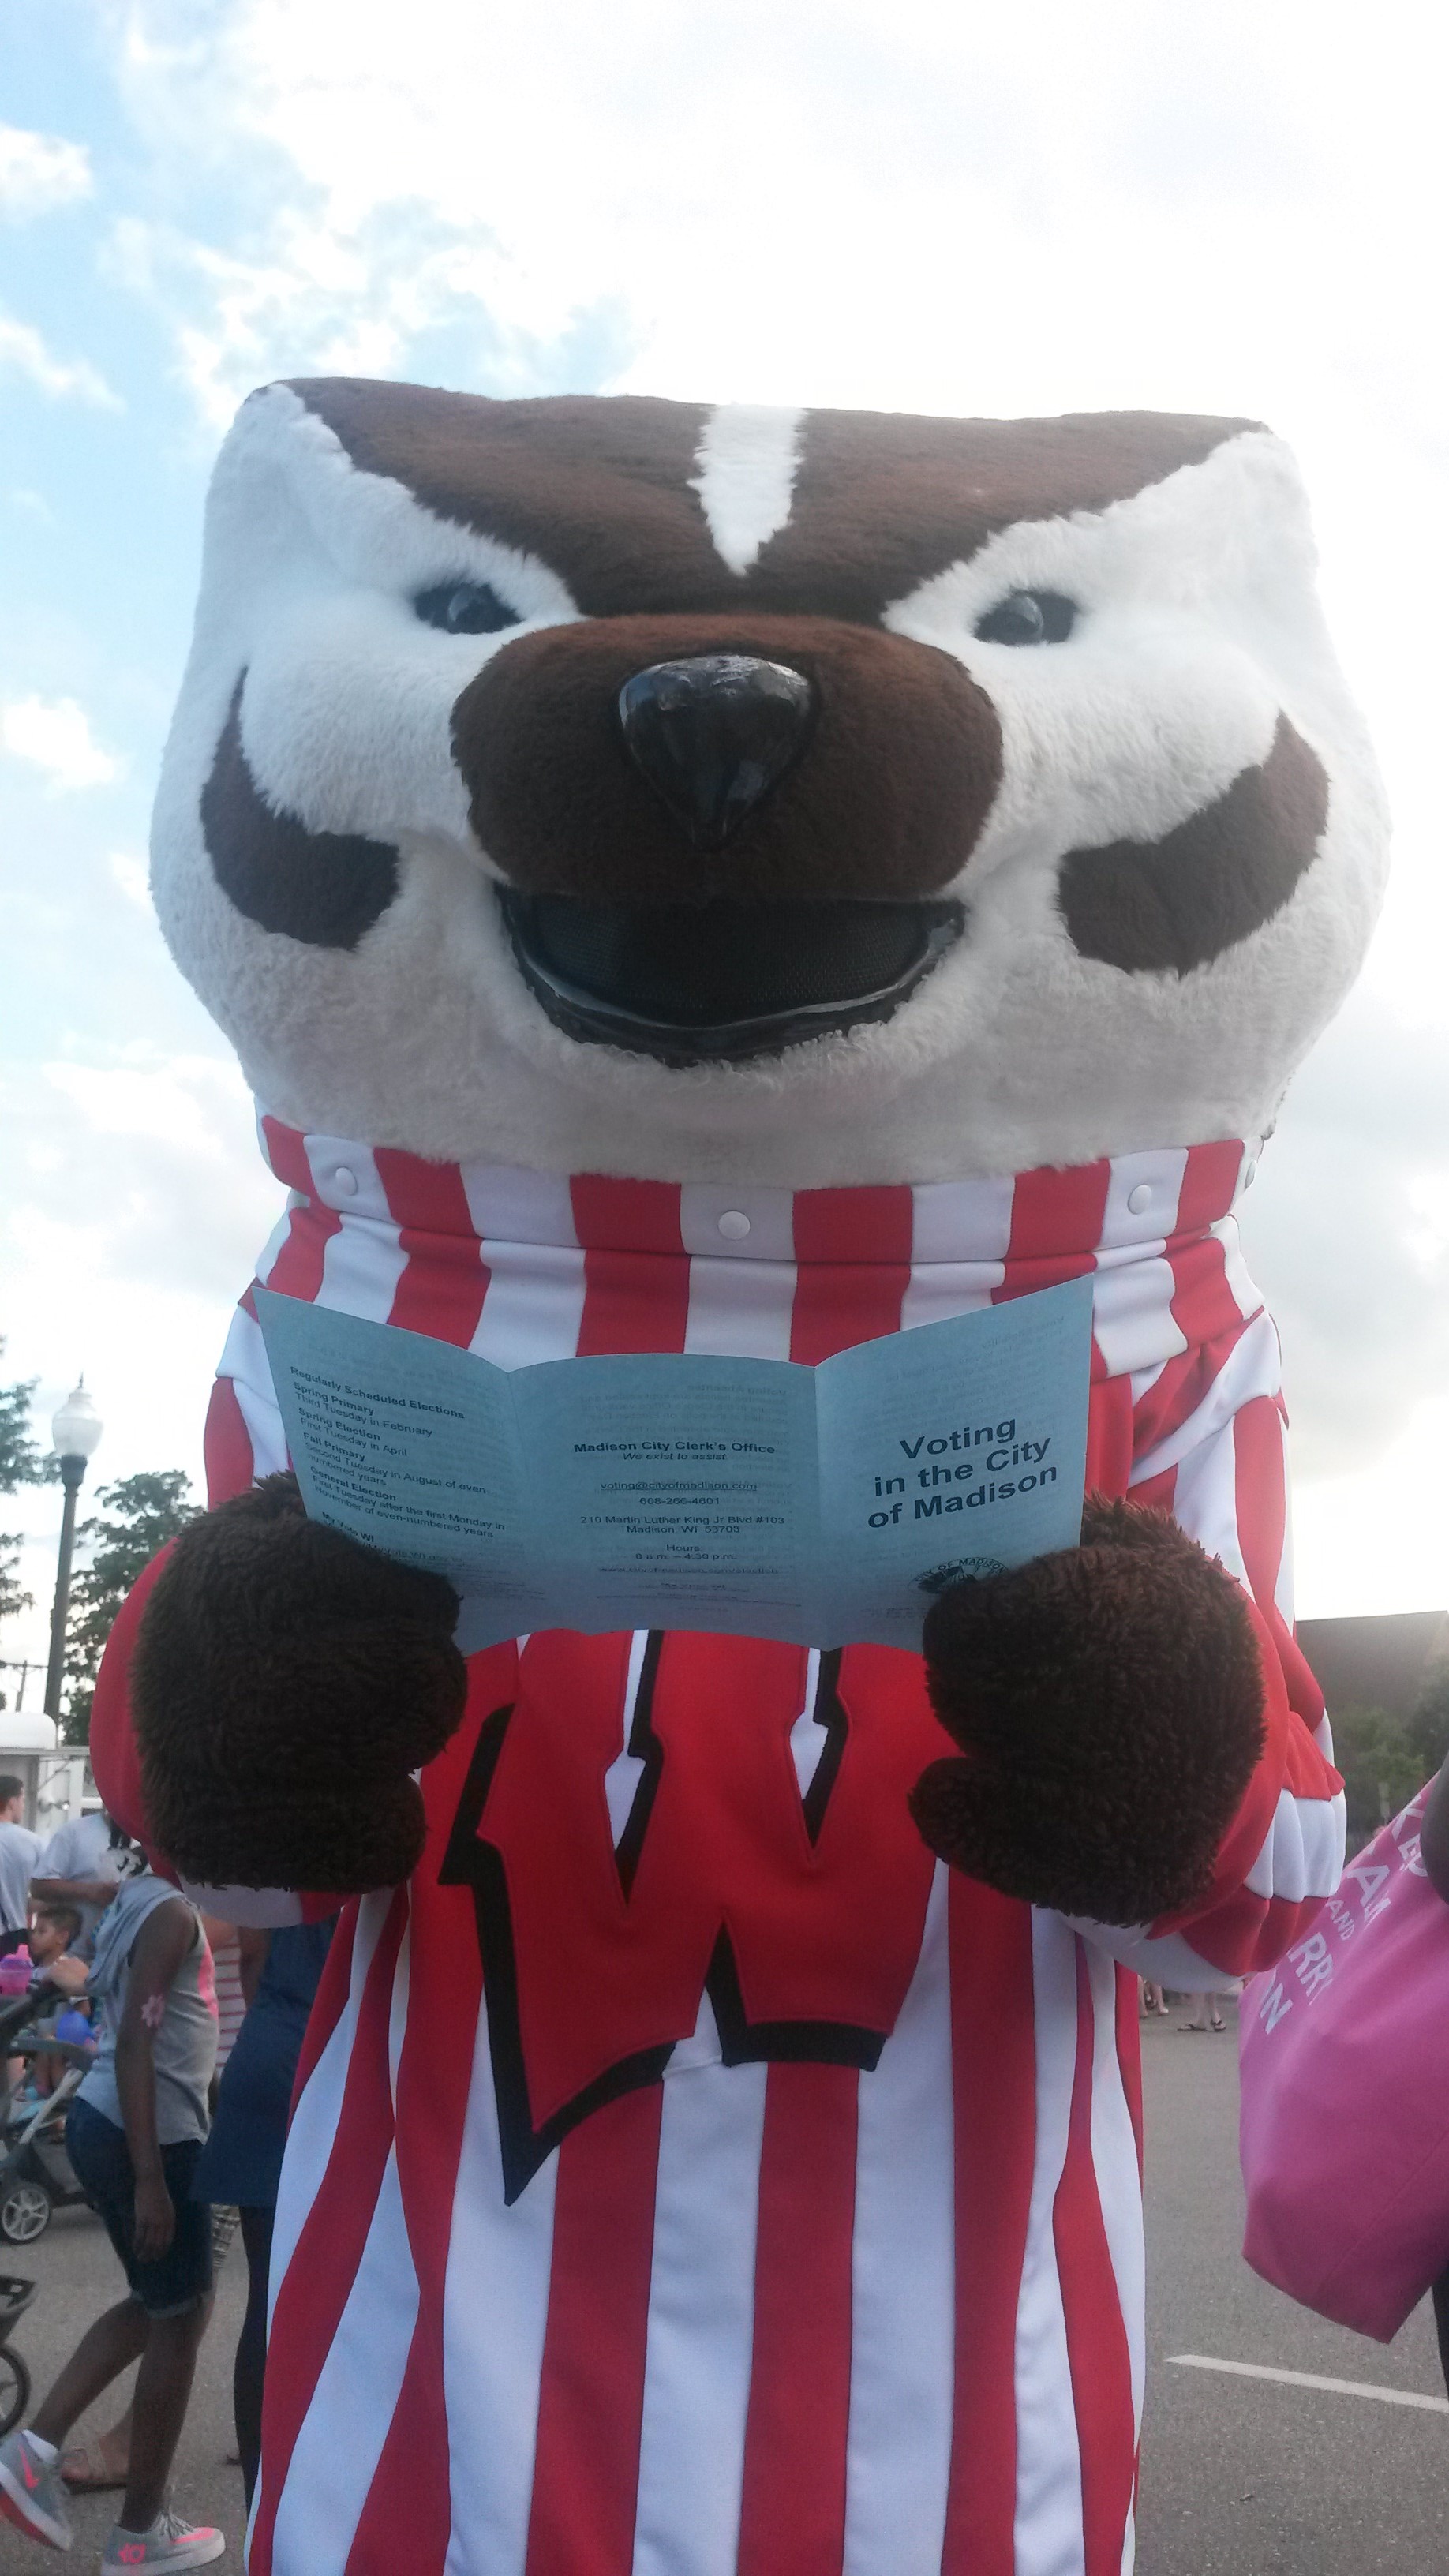 Bucky Badger mascot holding a brochure titled Voting in the City of Madison